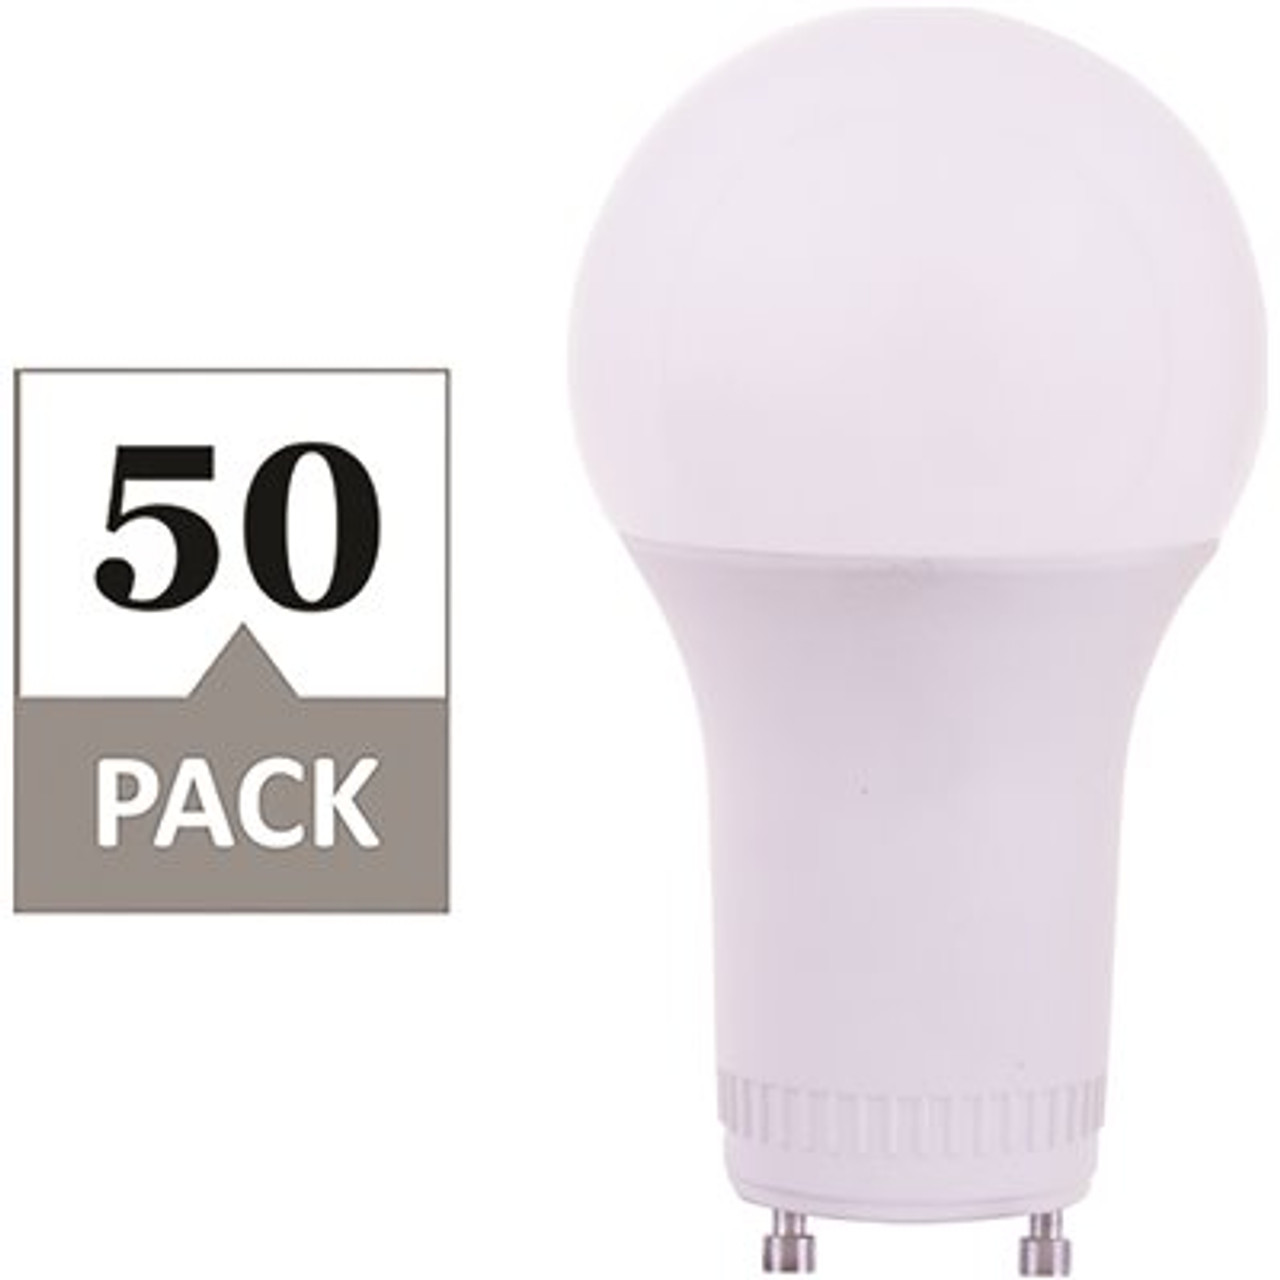 Simply Conserve 75-Watt Equivalent A19 Dimmable with GU24 Base CA CEC JA8 Compliant LED Light Bulb Cool White 4000K (50-Pack)